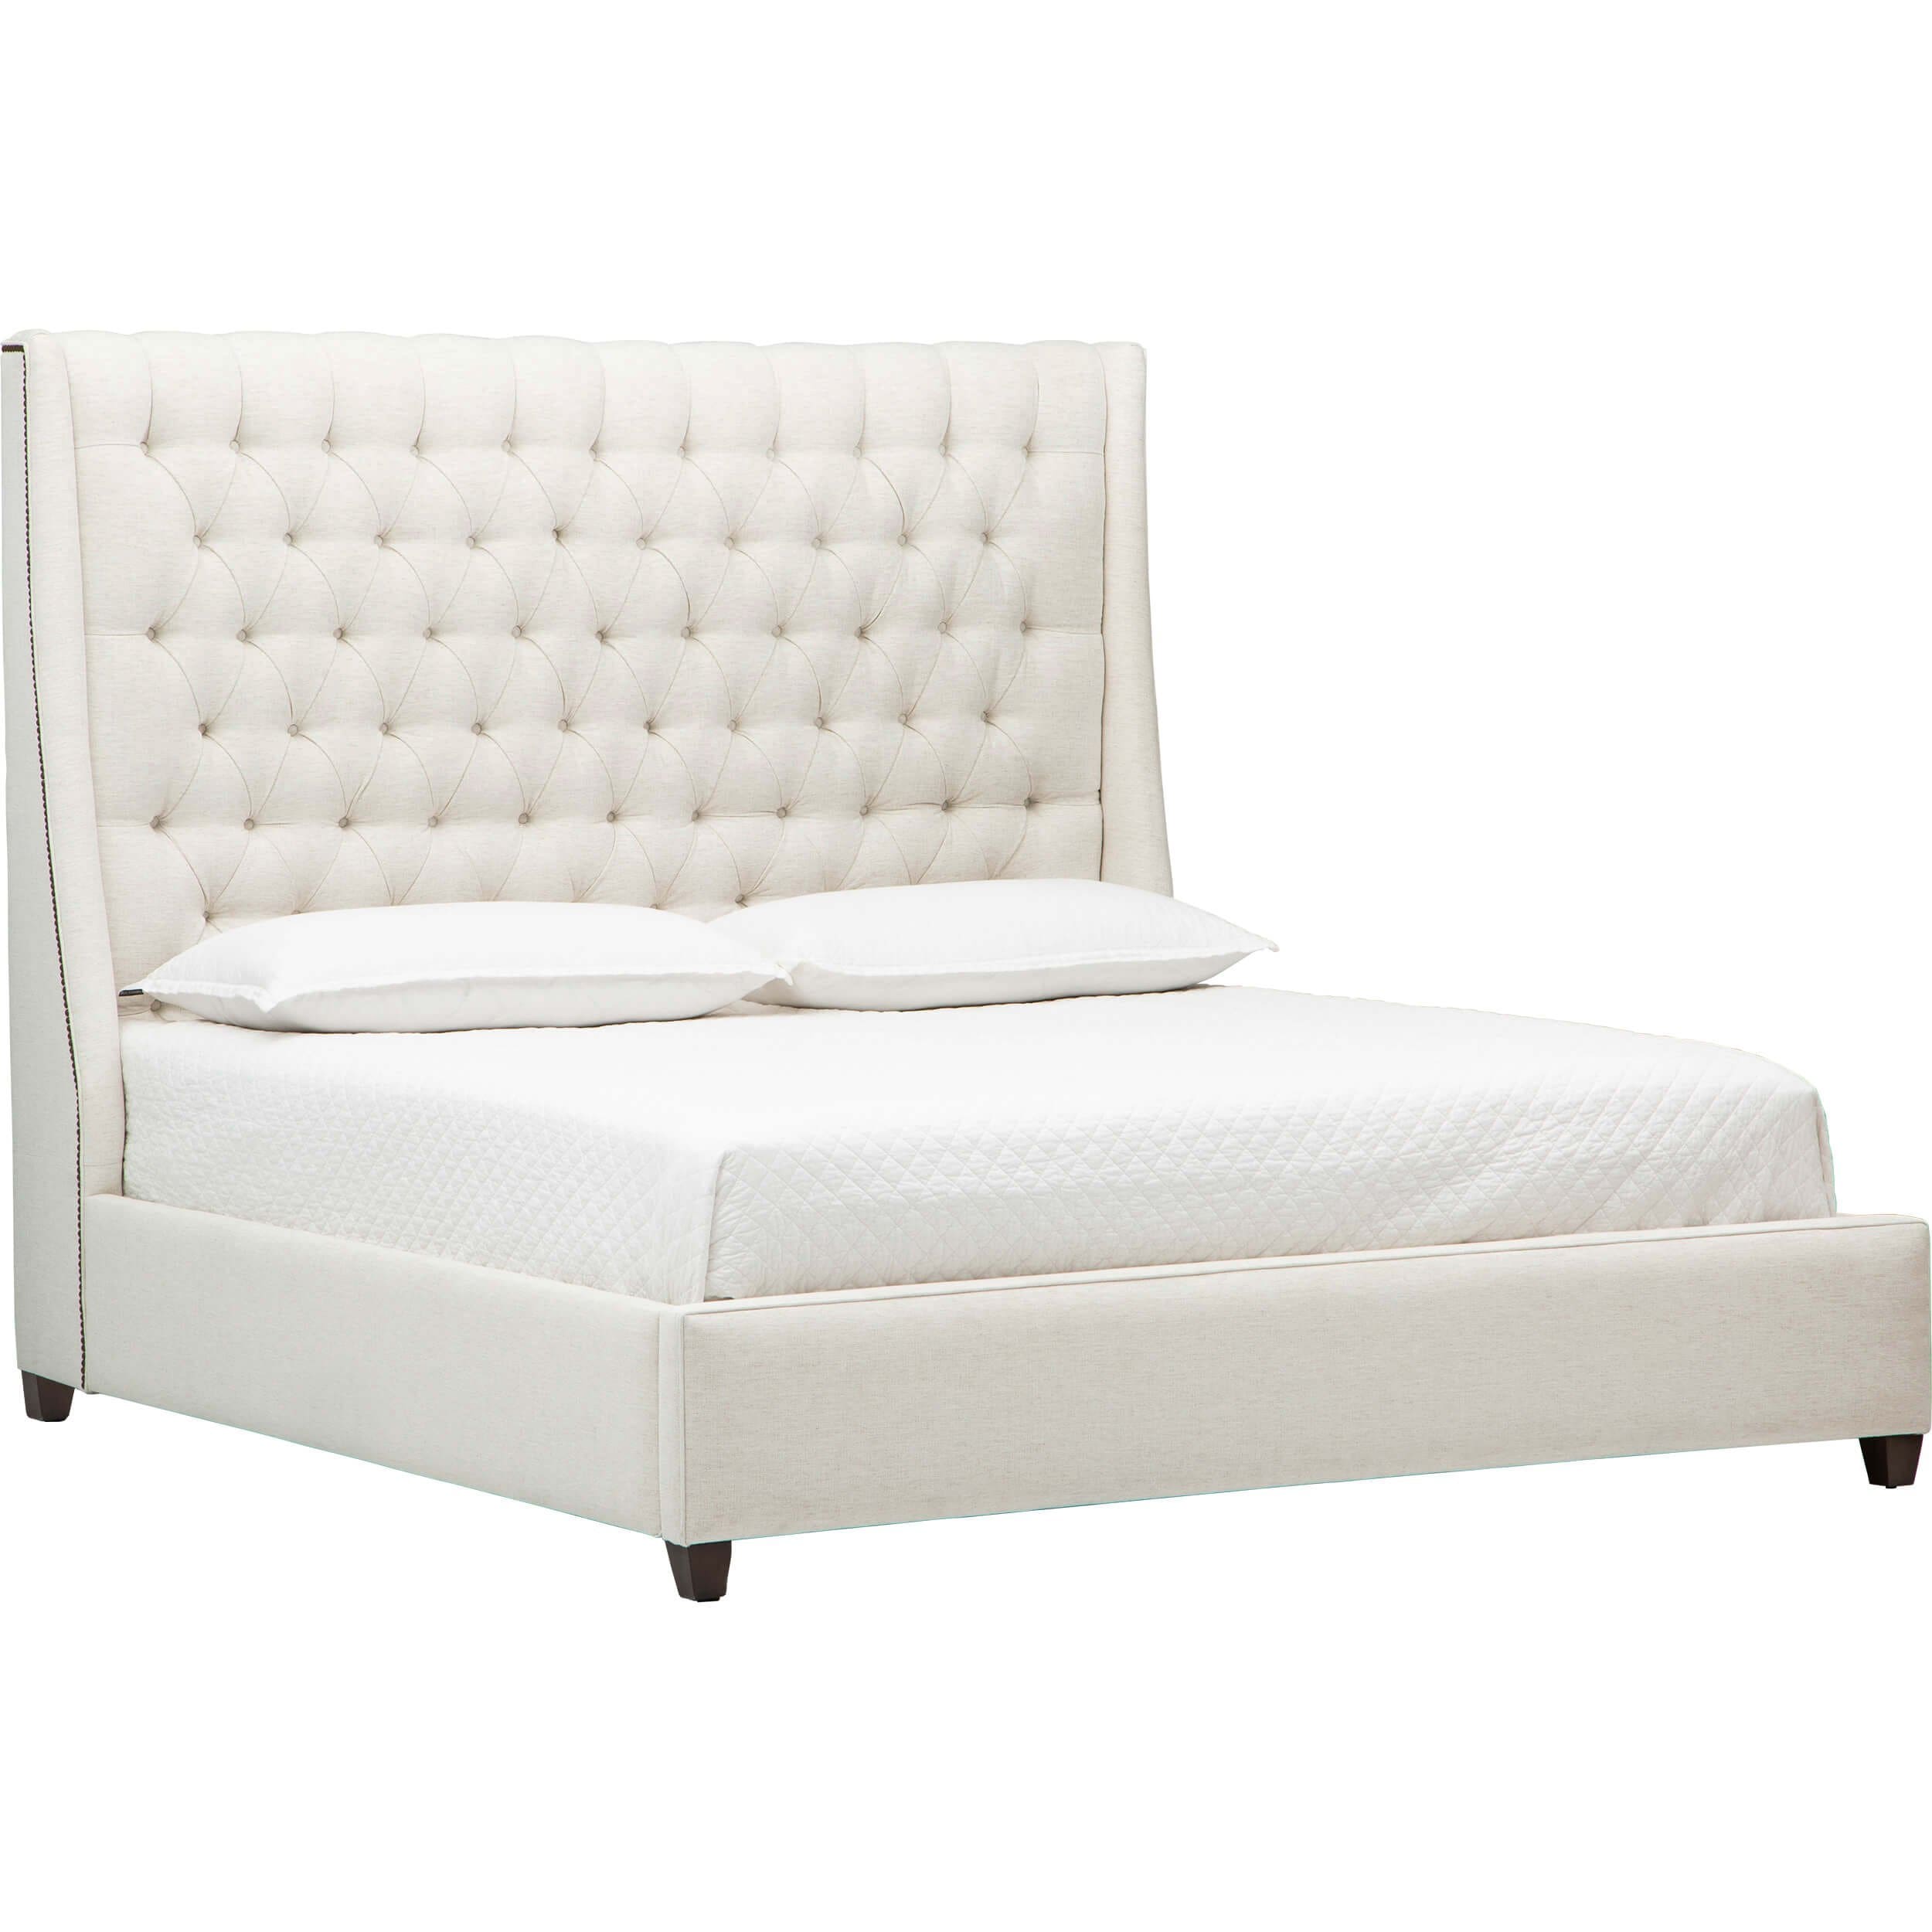 Image of Amelia Tall Bed, Nomad Snow